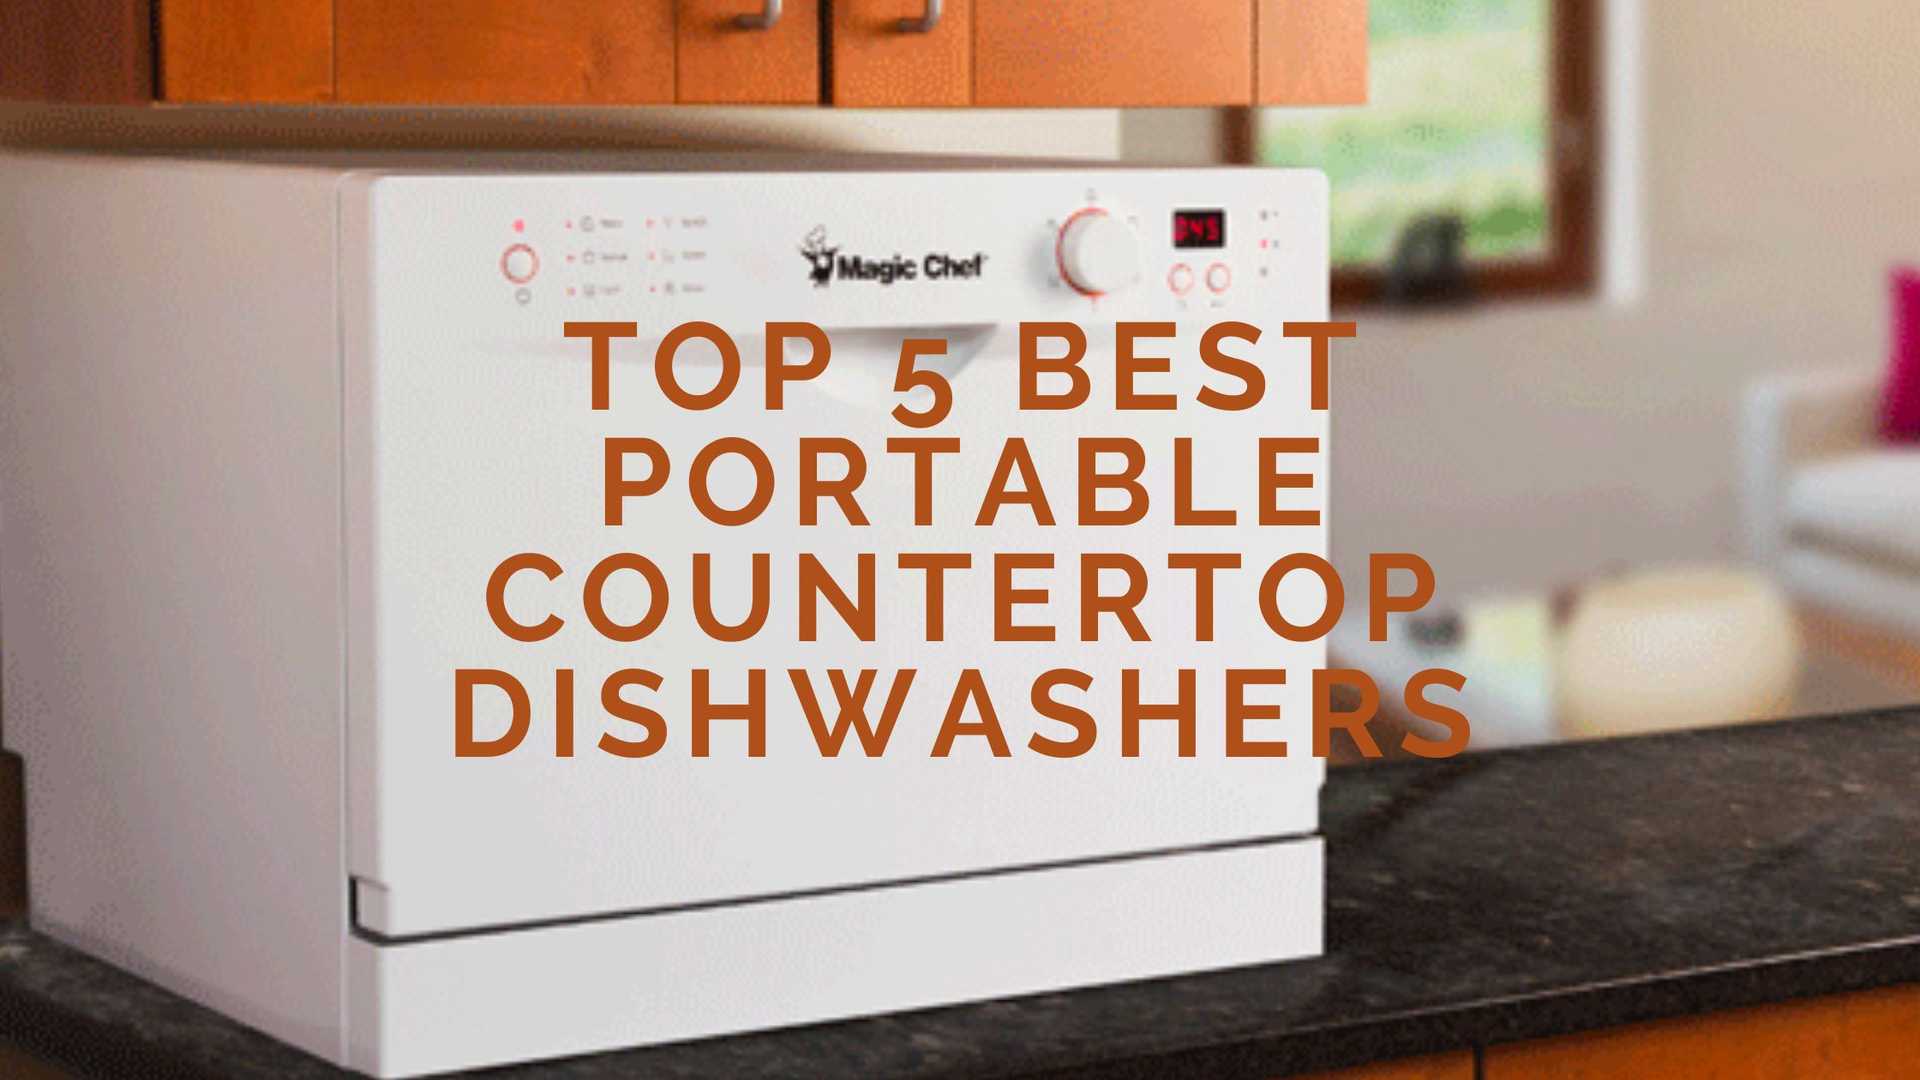 Top 5 Best Portable Countertop Dishwashers in 2022